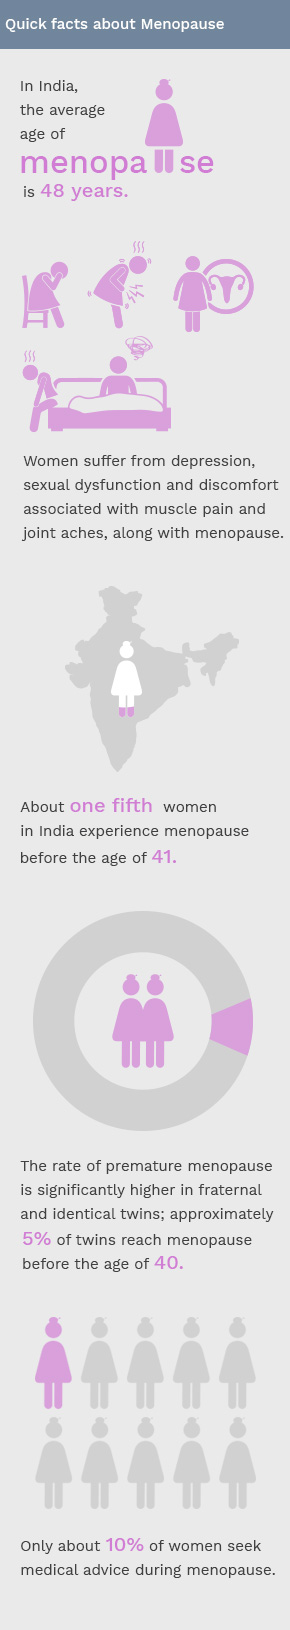 Facts About Menopause